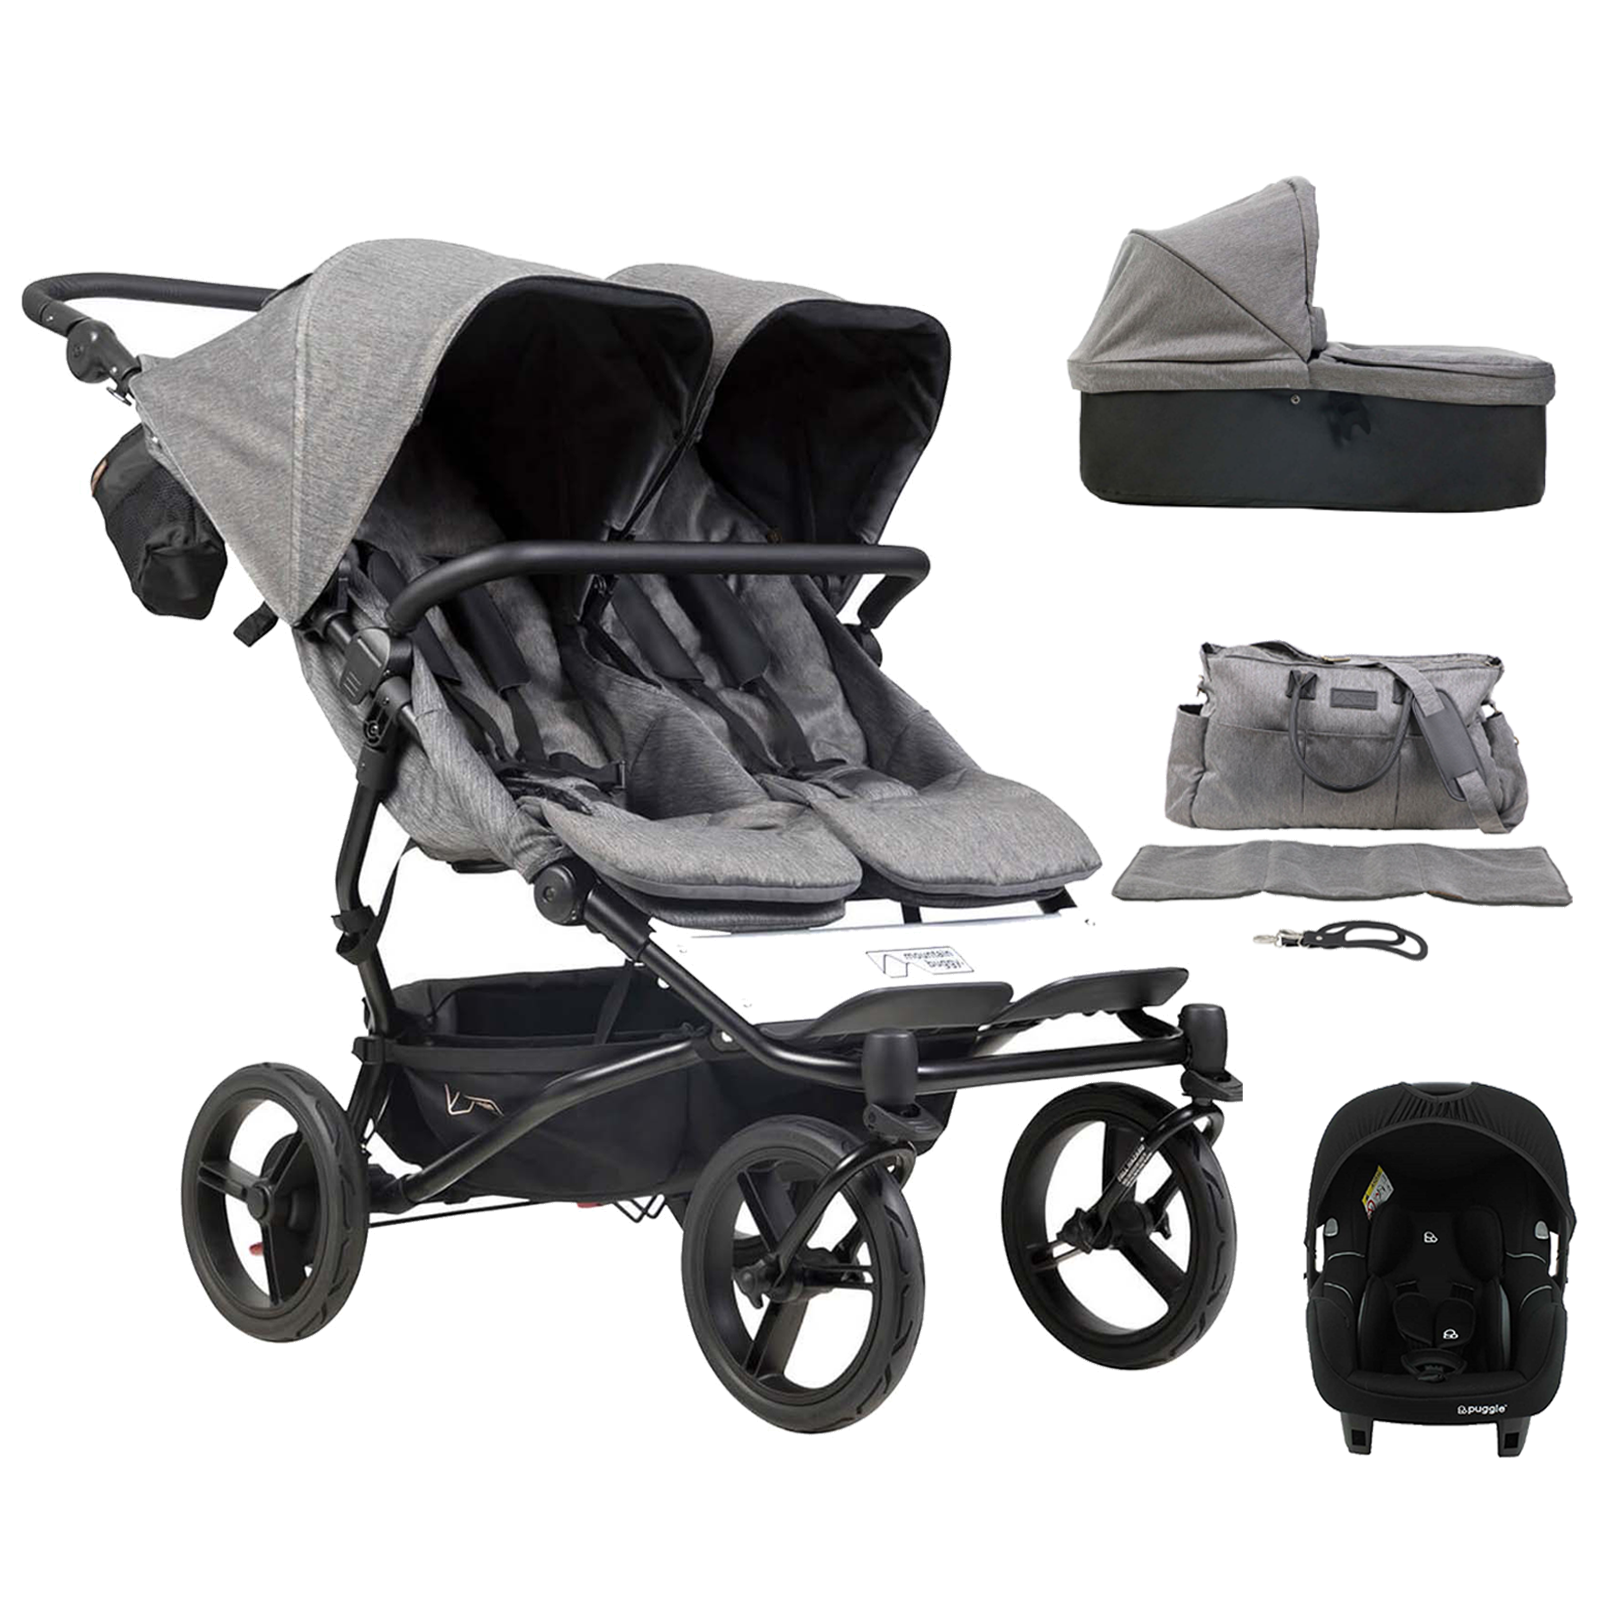 Mountain Buggy Duet Luxury (Alston) Travel System With Carrycot - Herringbone